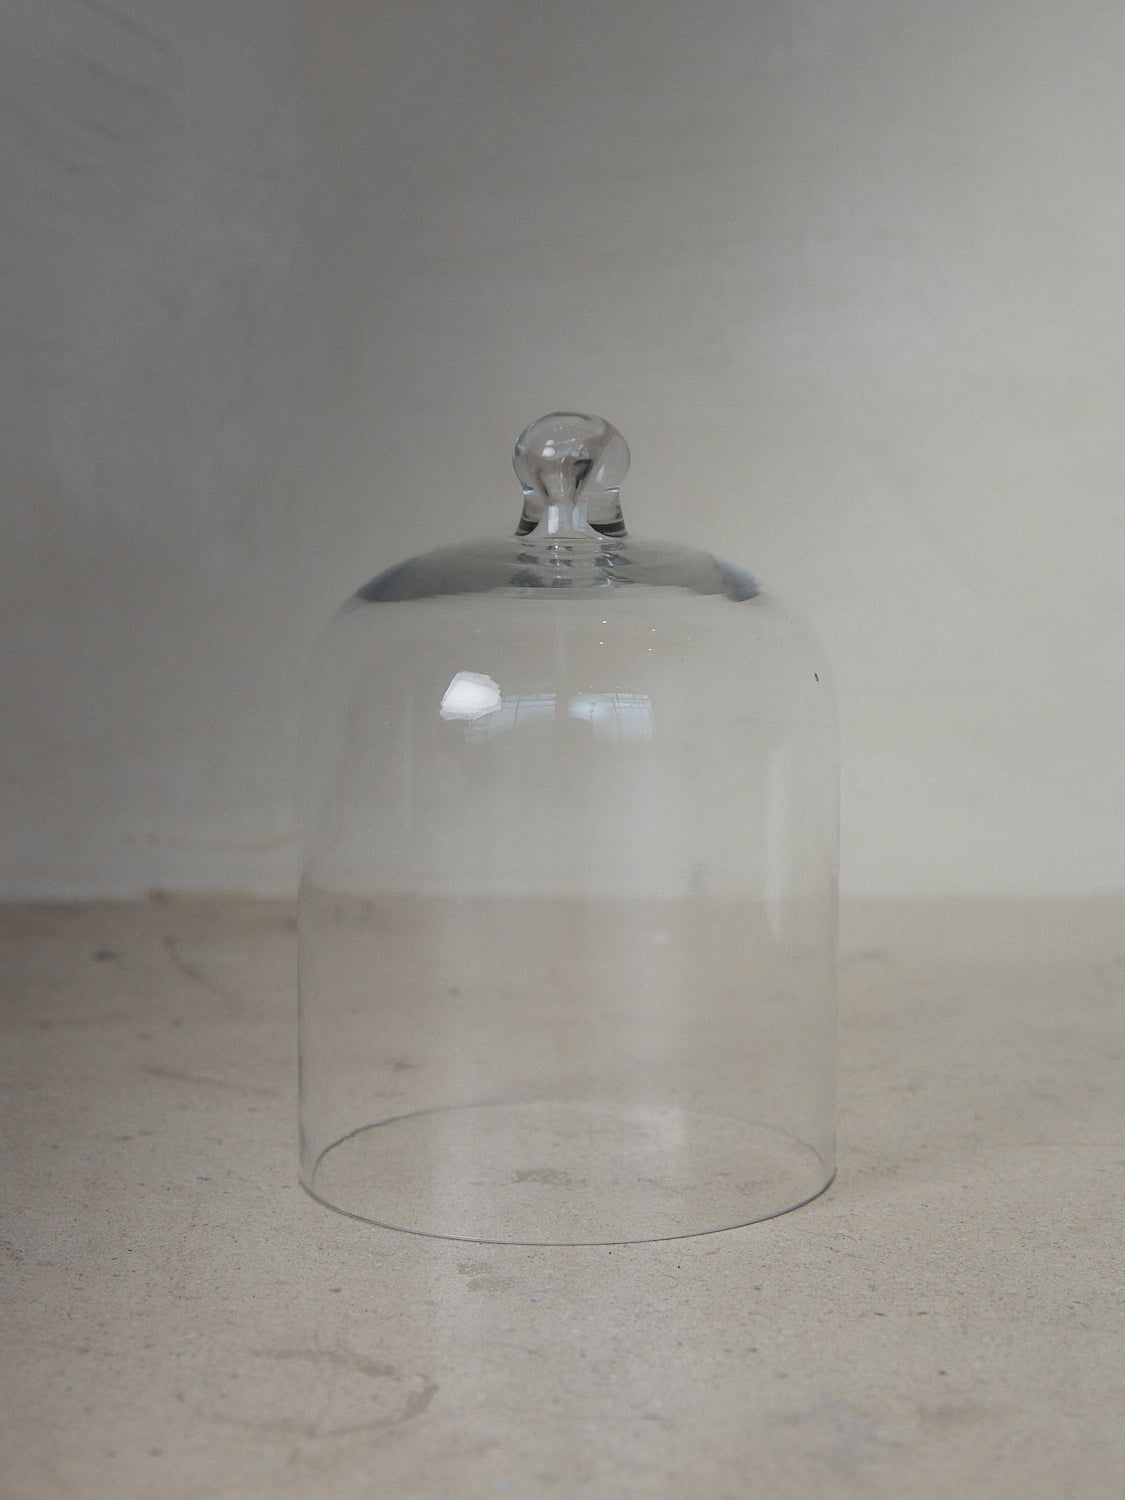 Glass Cloche. Decorative dome shaped glass cloche candle cover designed to protect candle when not in use